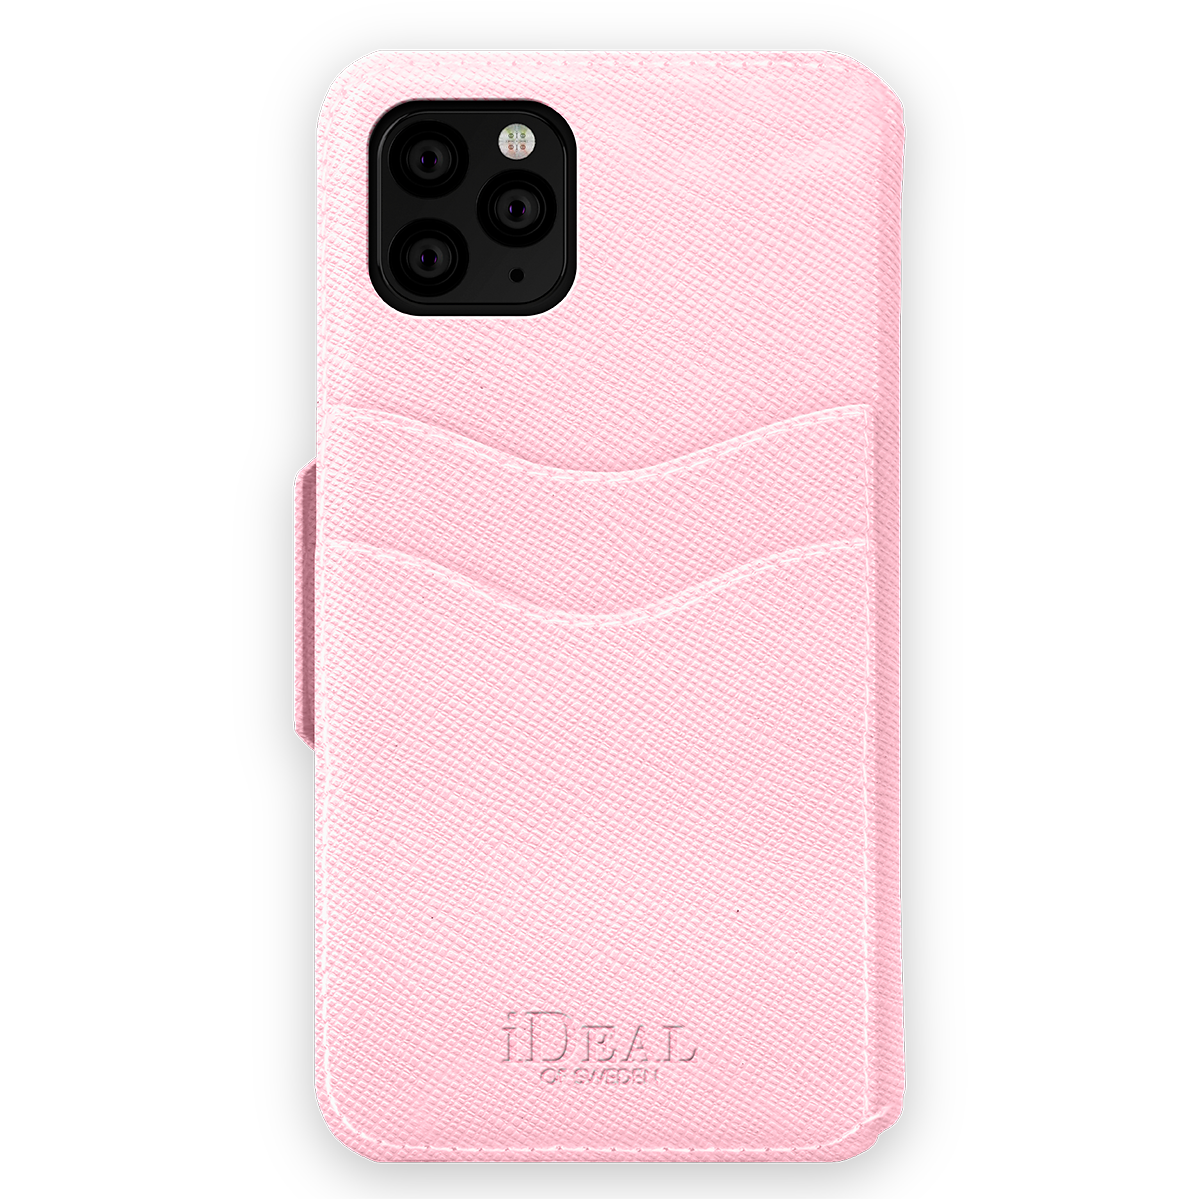 iDeal Magnet Wallet rosa, iPhone 11 Pro